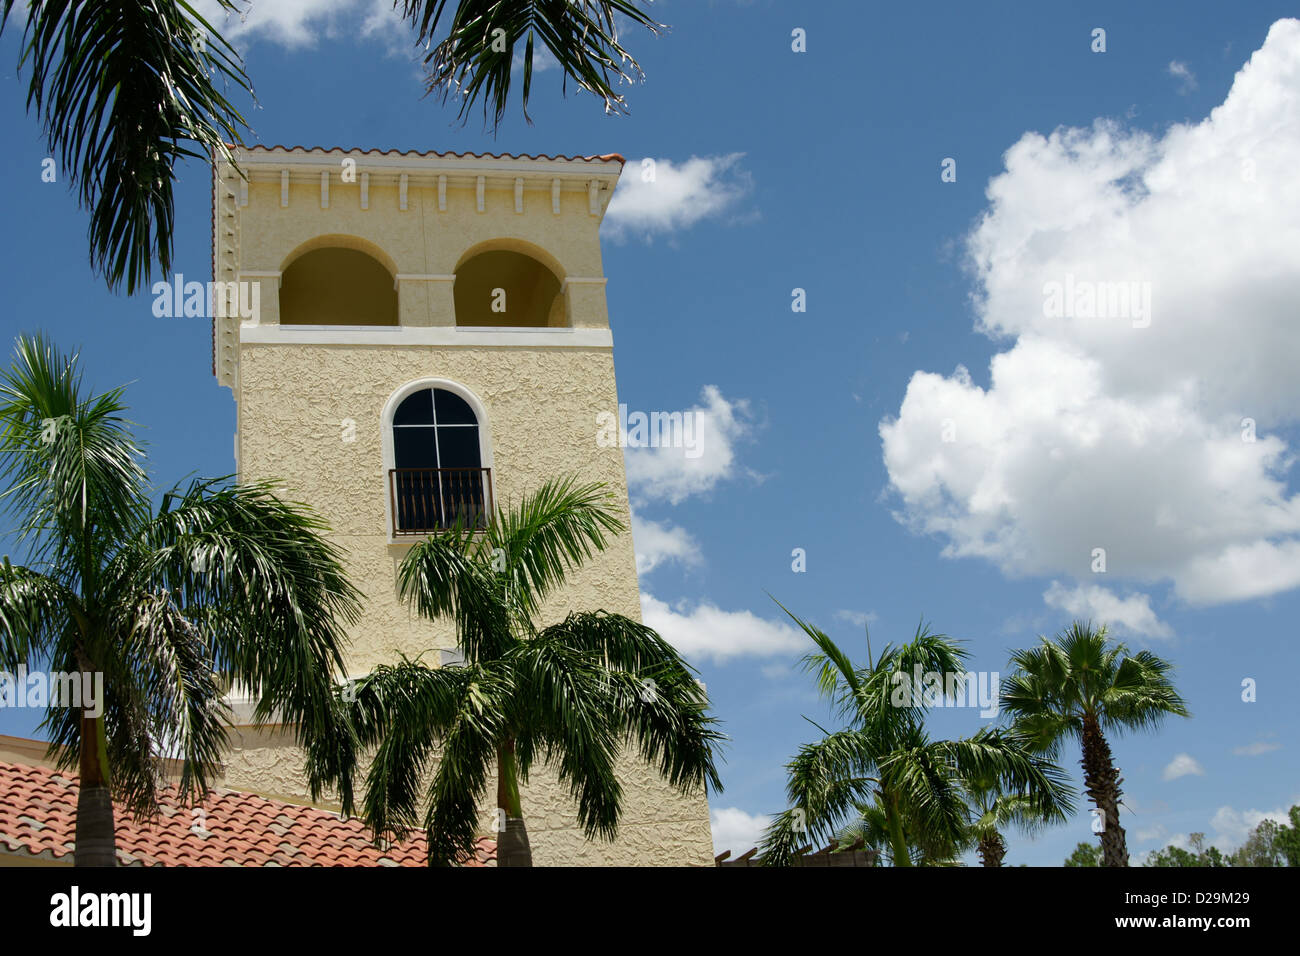 Palm trees and building Stock Photo